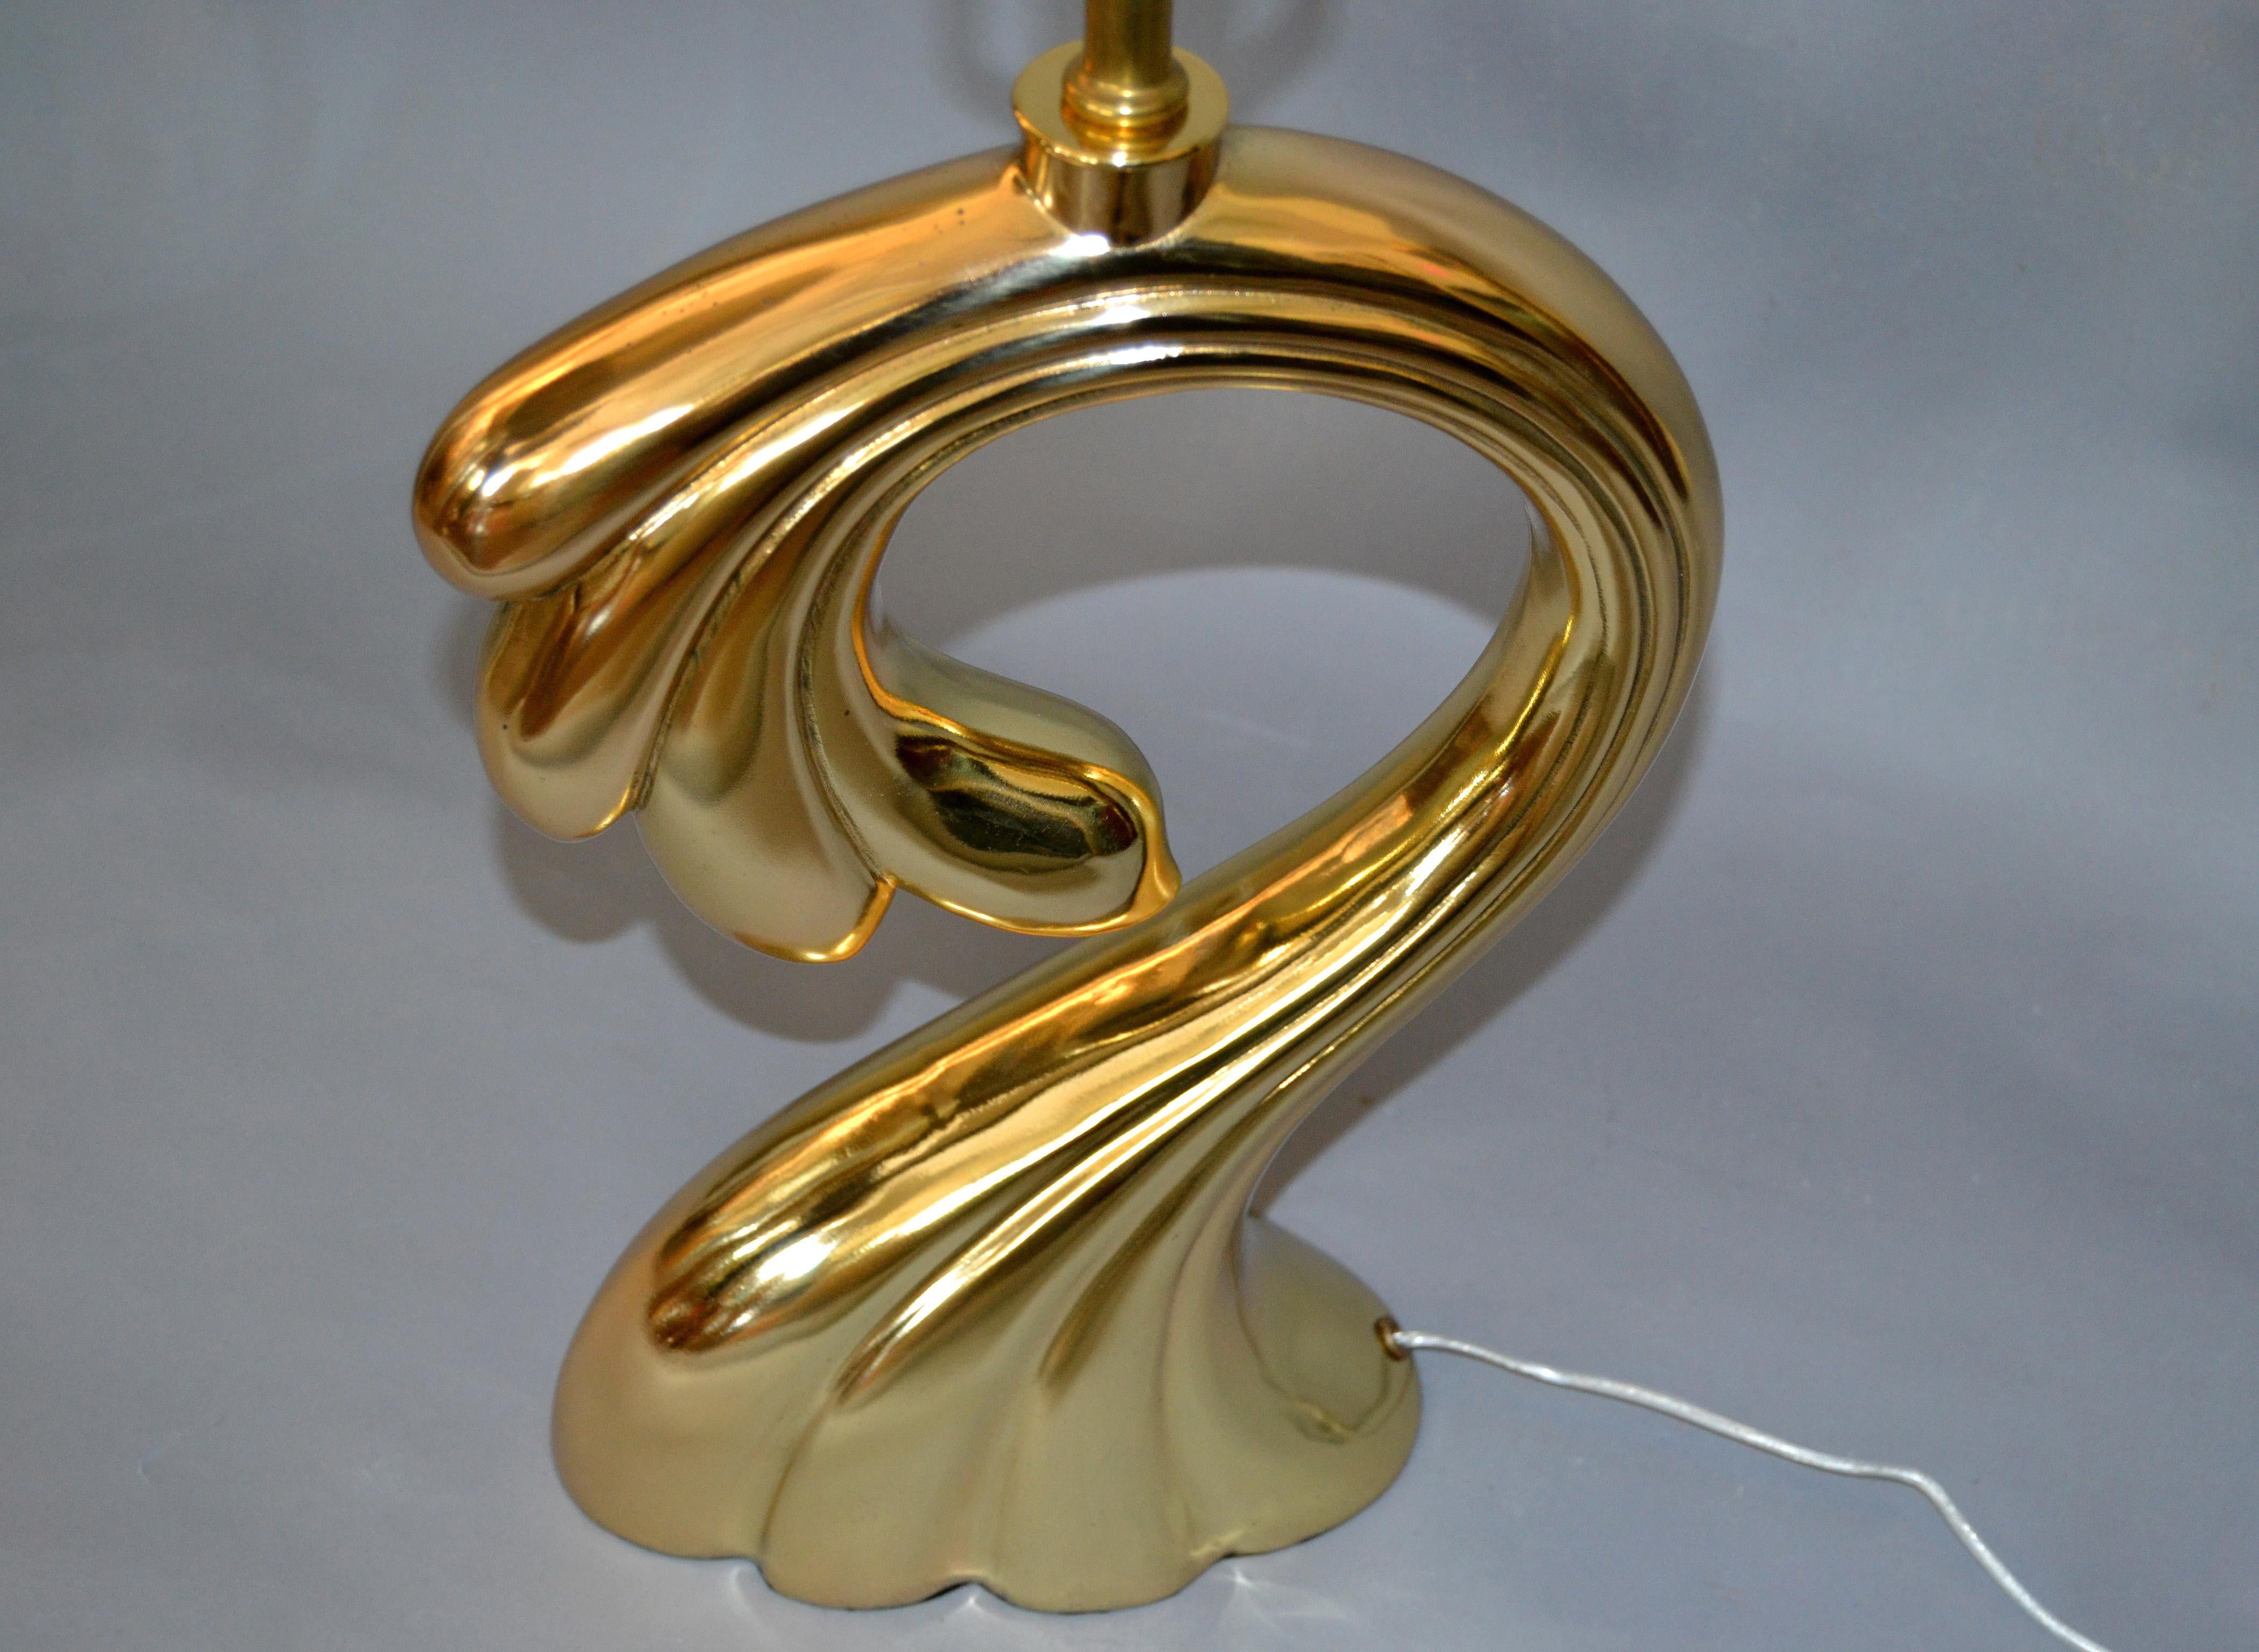 Pierre Cardin Manner Sculptural Brass Table Lamp Mid-Century Modern In Good Condition For Sale In Miami, FL